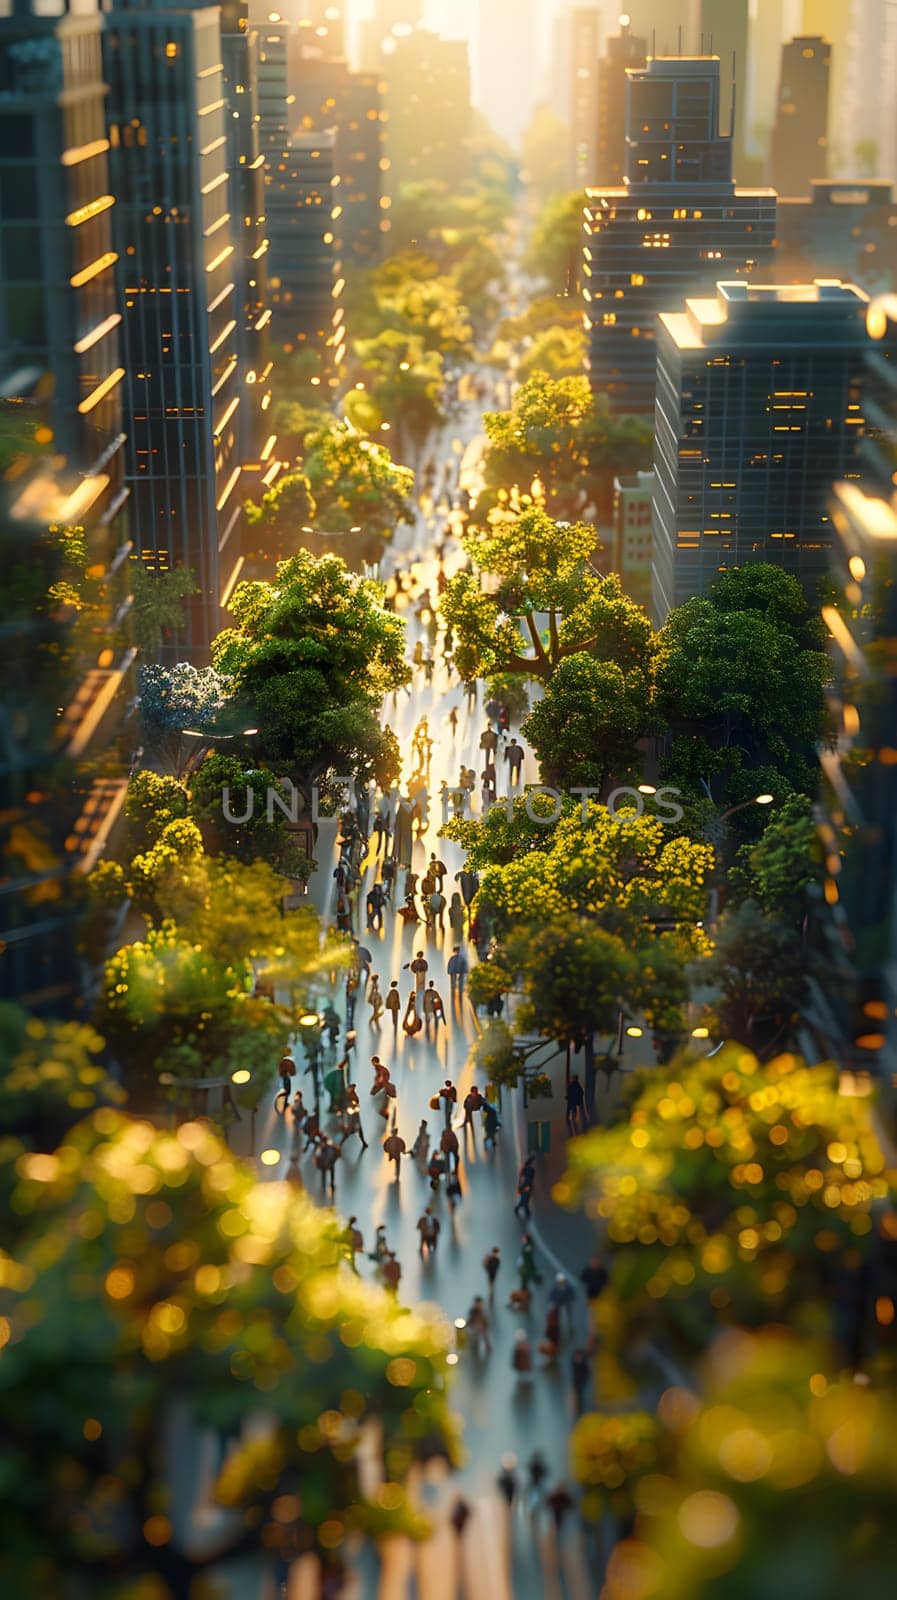 A group of individuals strolling along a city street lined with trees, amidst an urban landscape. The scene resembles a painting with a waterfall and water feature adding to the natural beauty